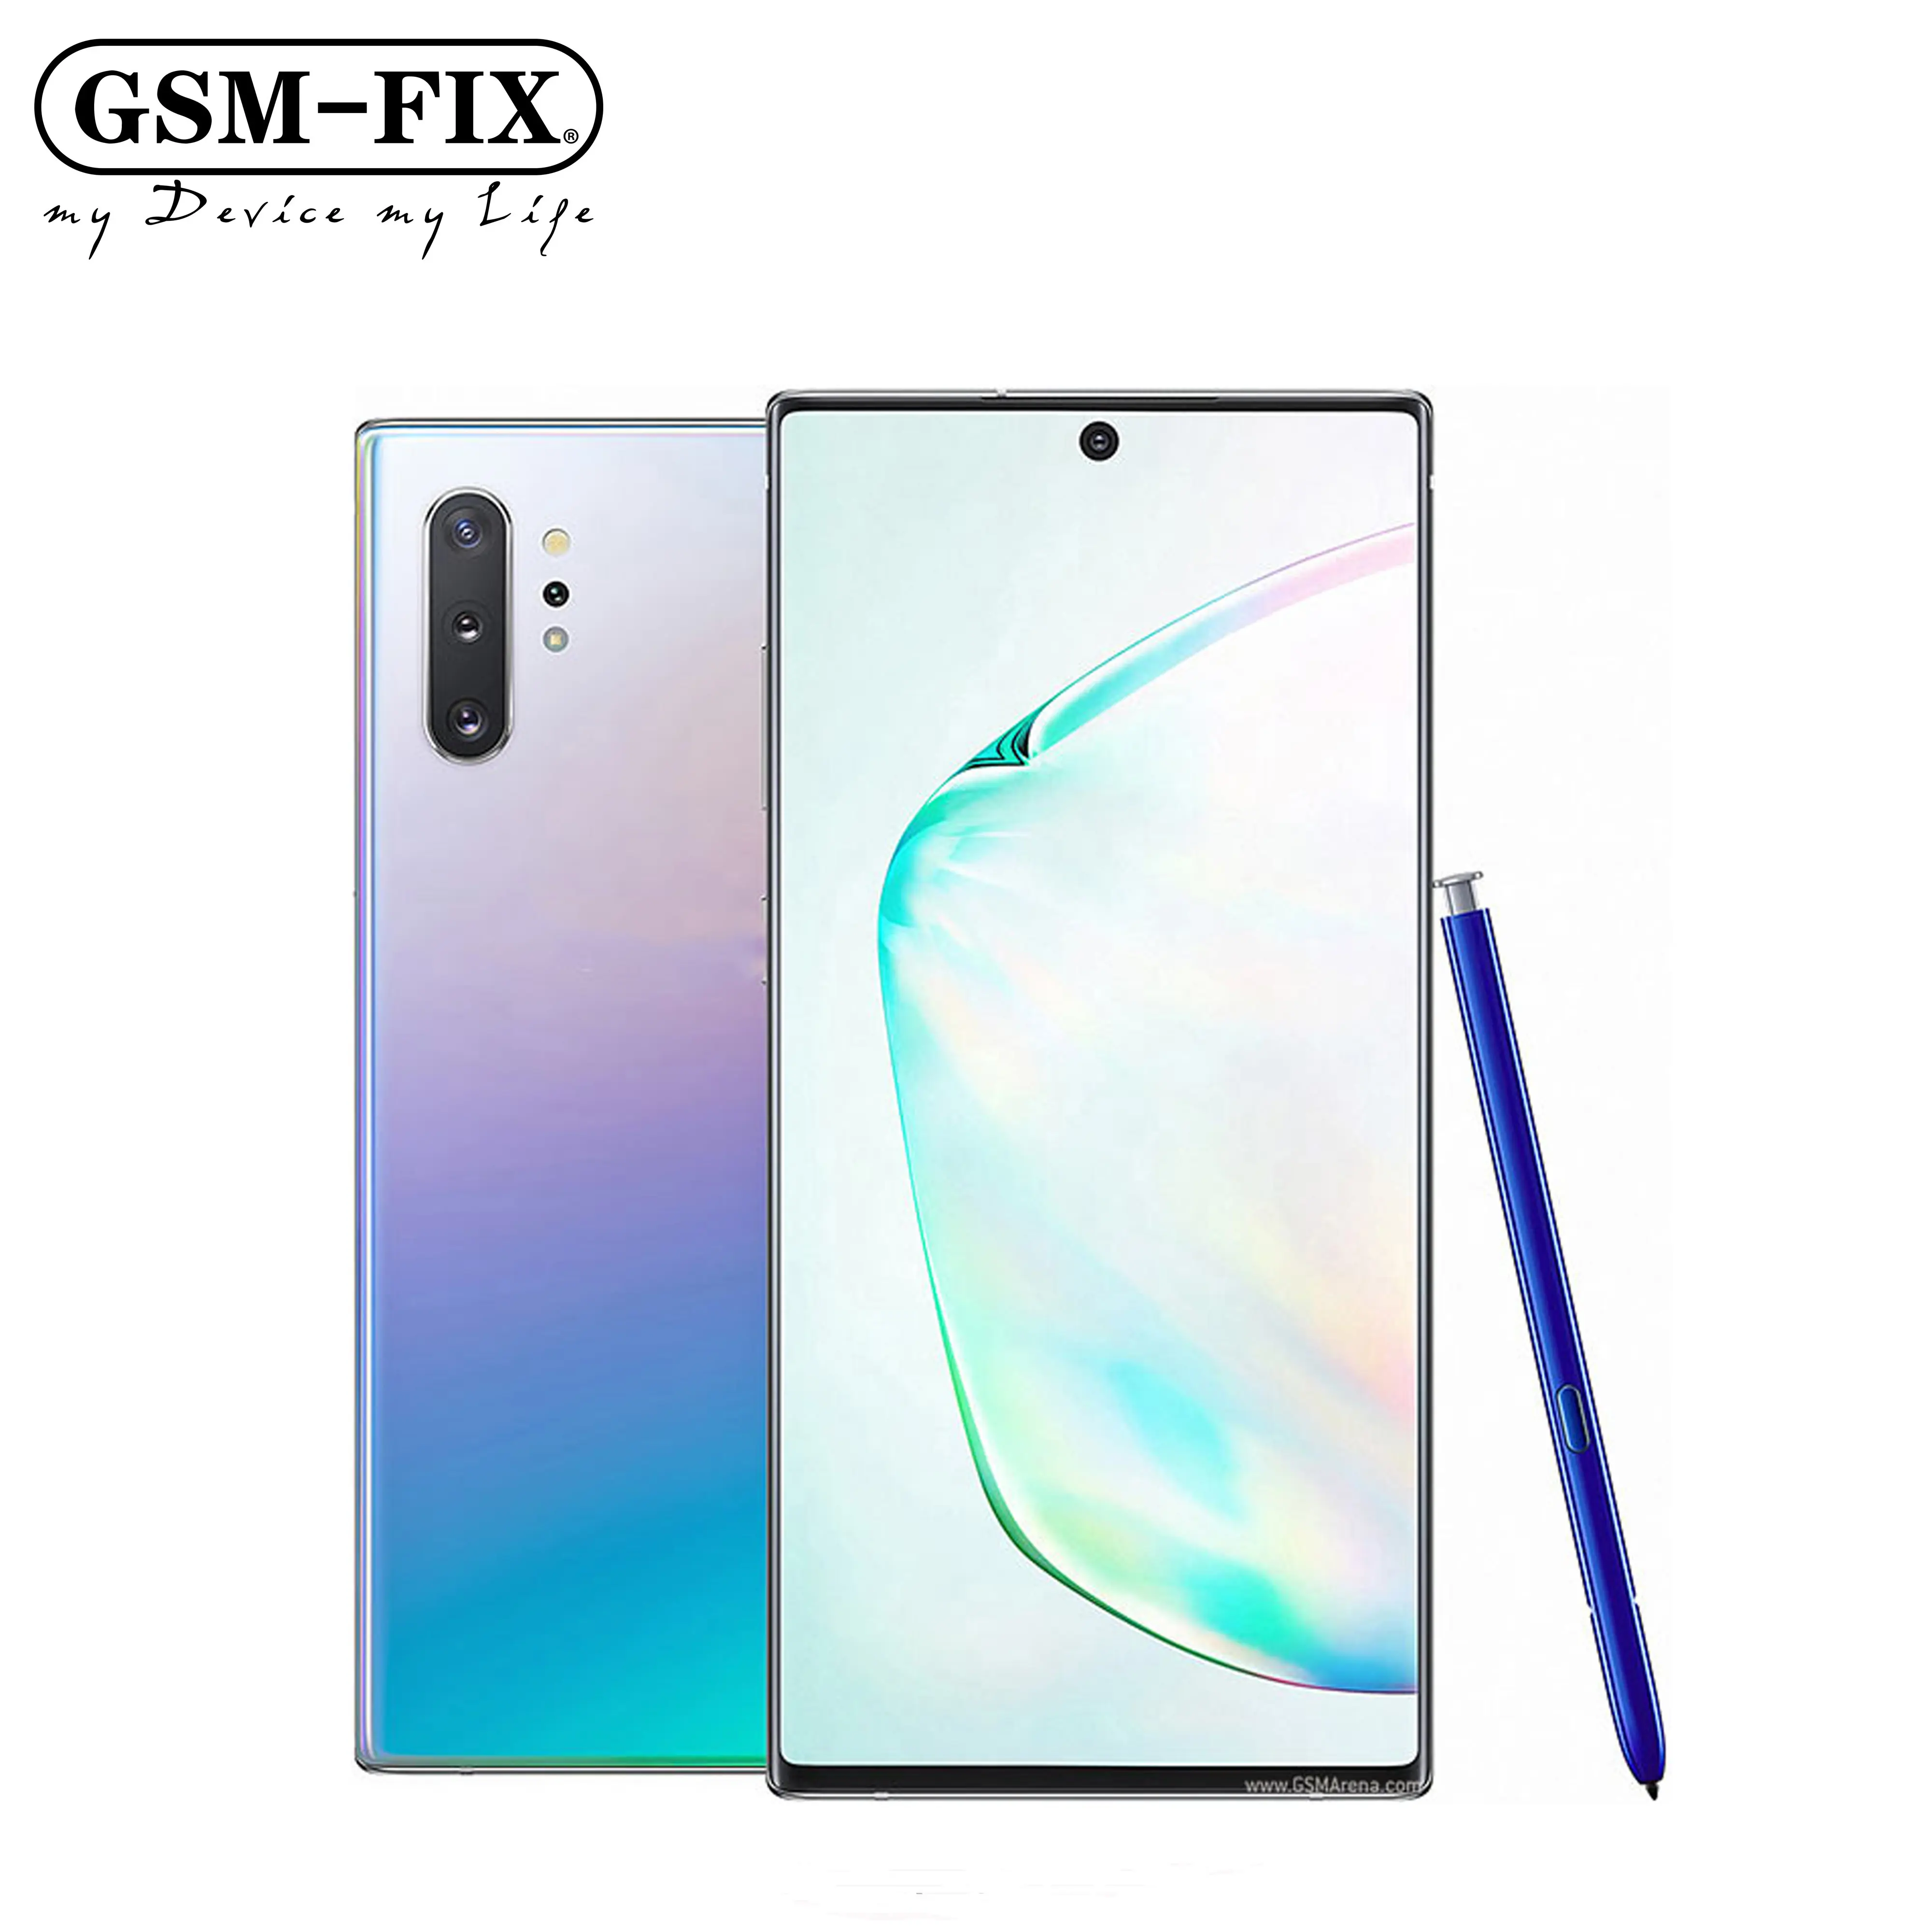 GSM-FIX For Samsung Galaxy Note 10 Plus Note10+ Duos N975FD Dual Sim Global Version 12GB 256/512GB 6.8" Exynos 4G LTE Cell Phone